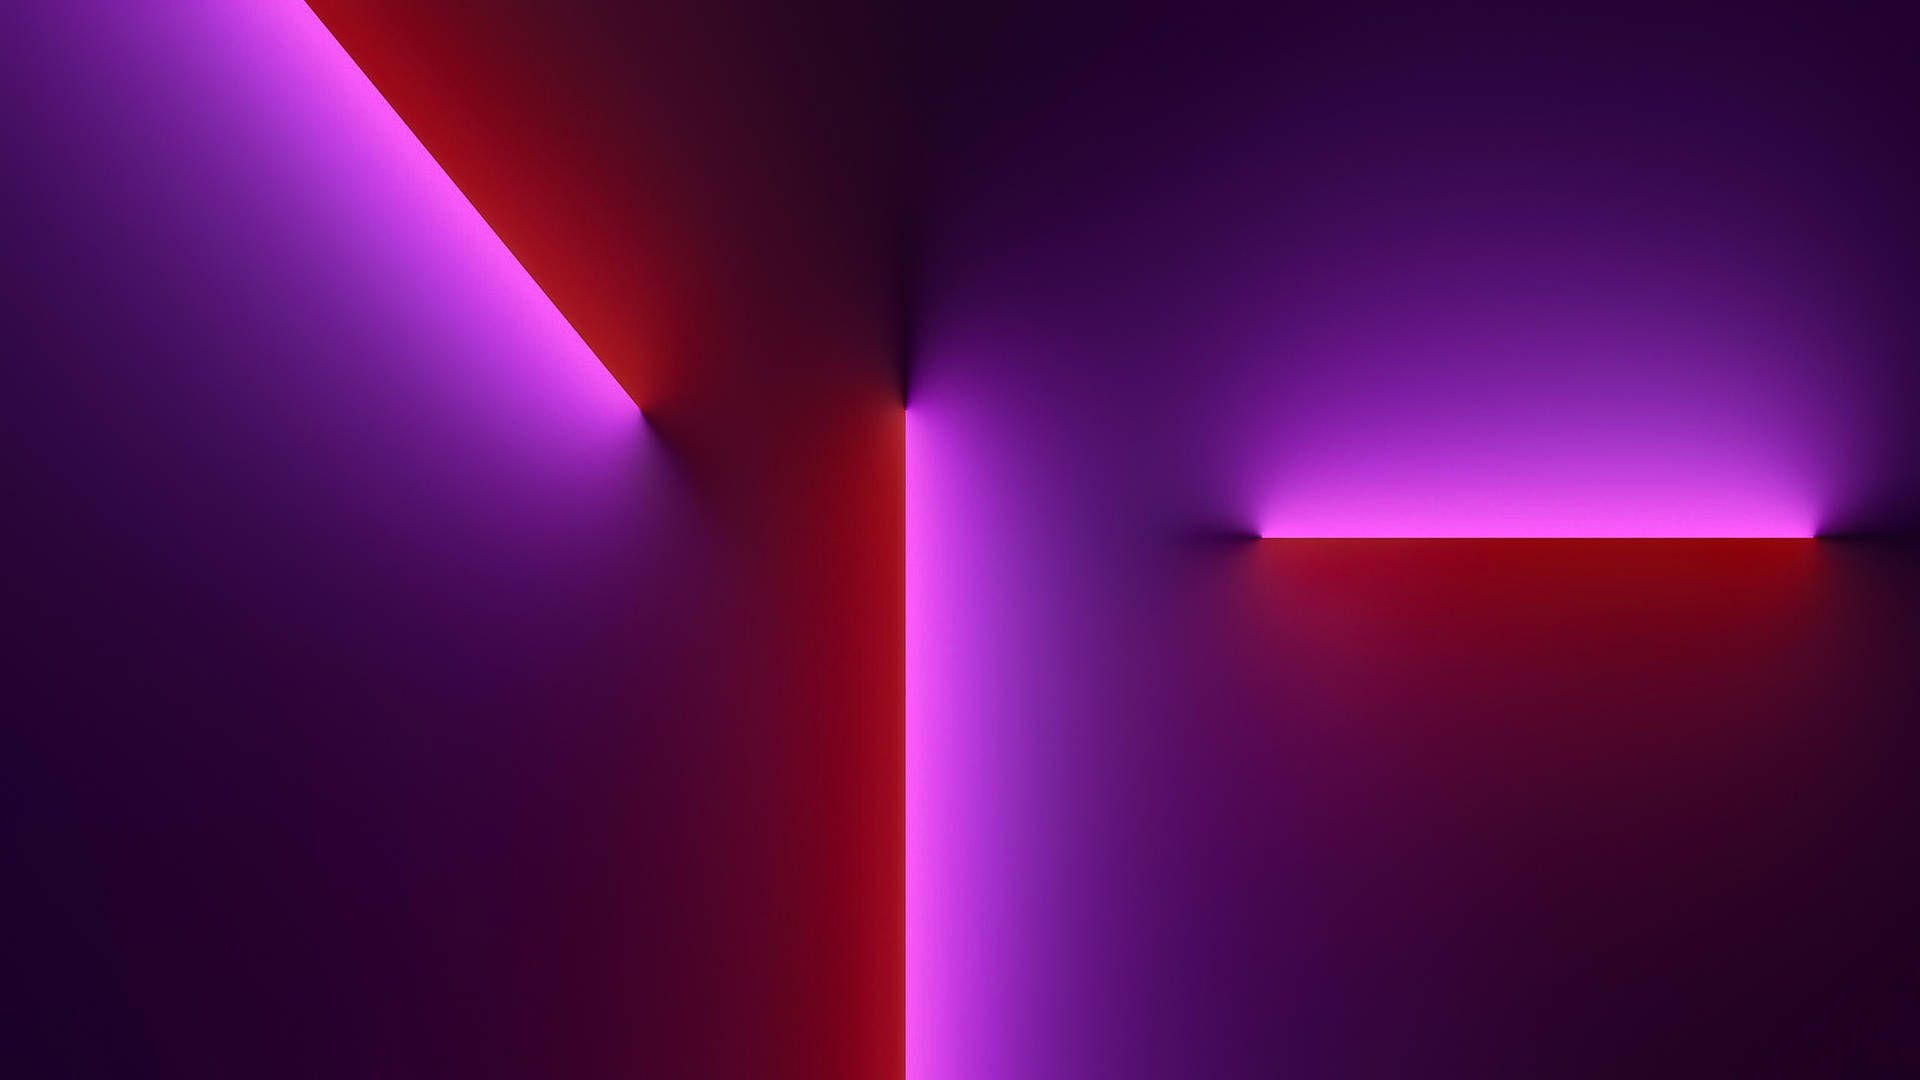 A red and purple abstract wallpaper with geometric shapes - Magenta